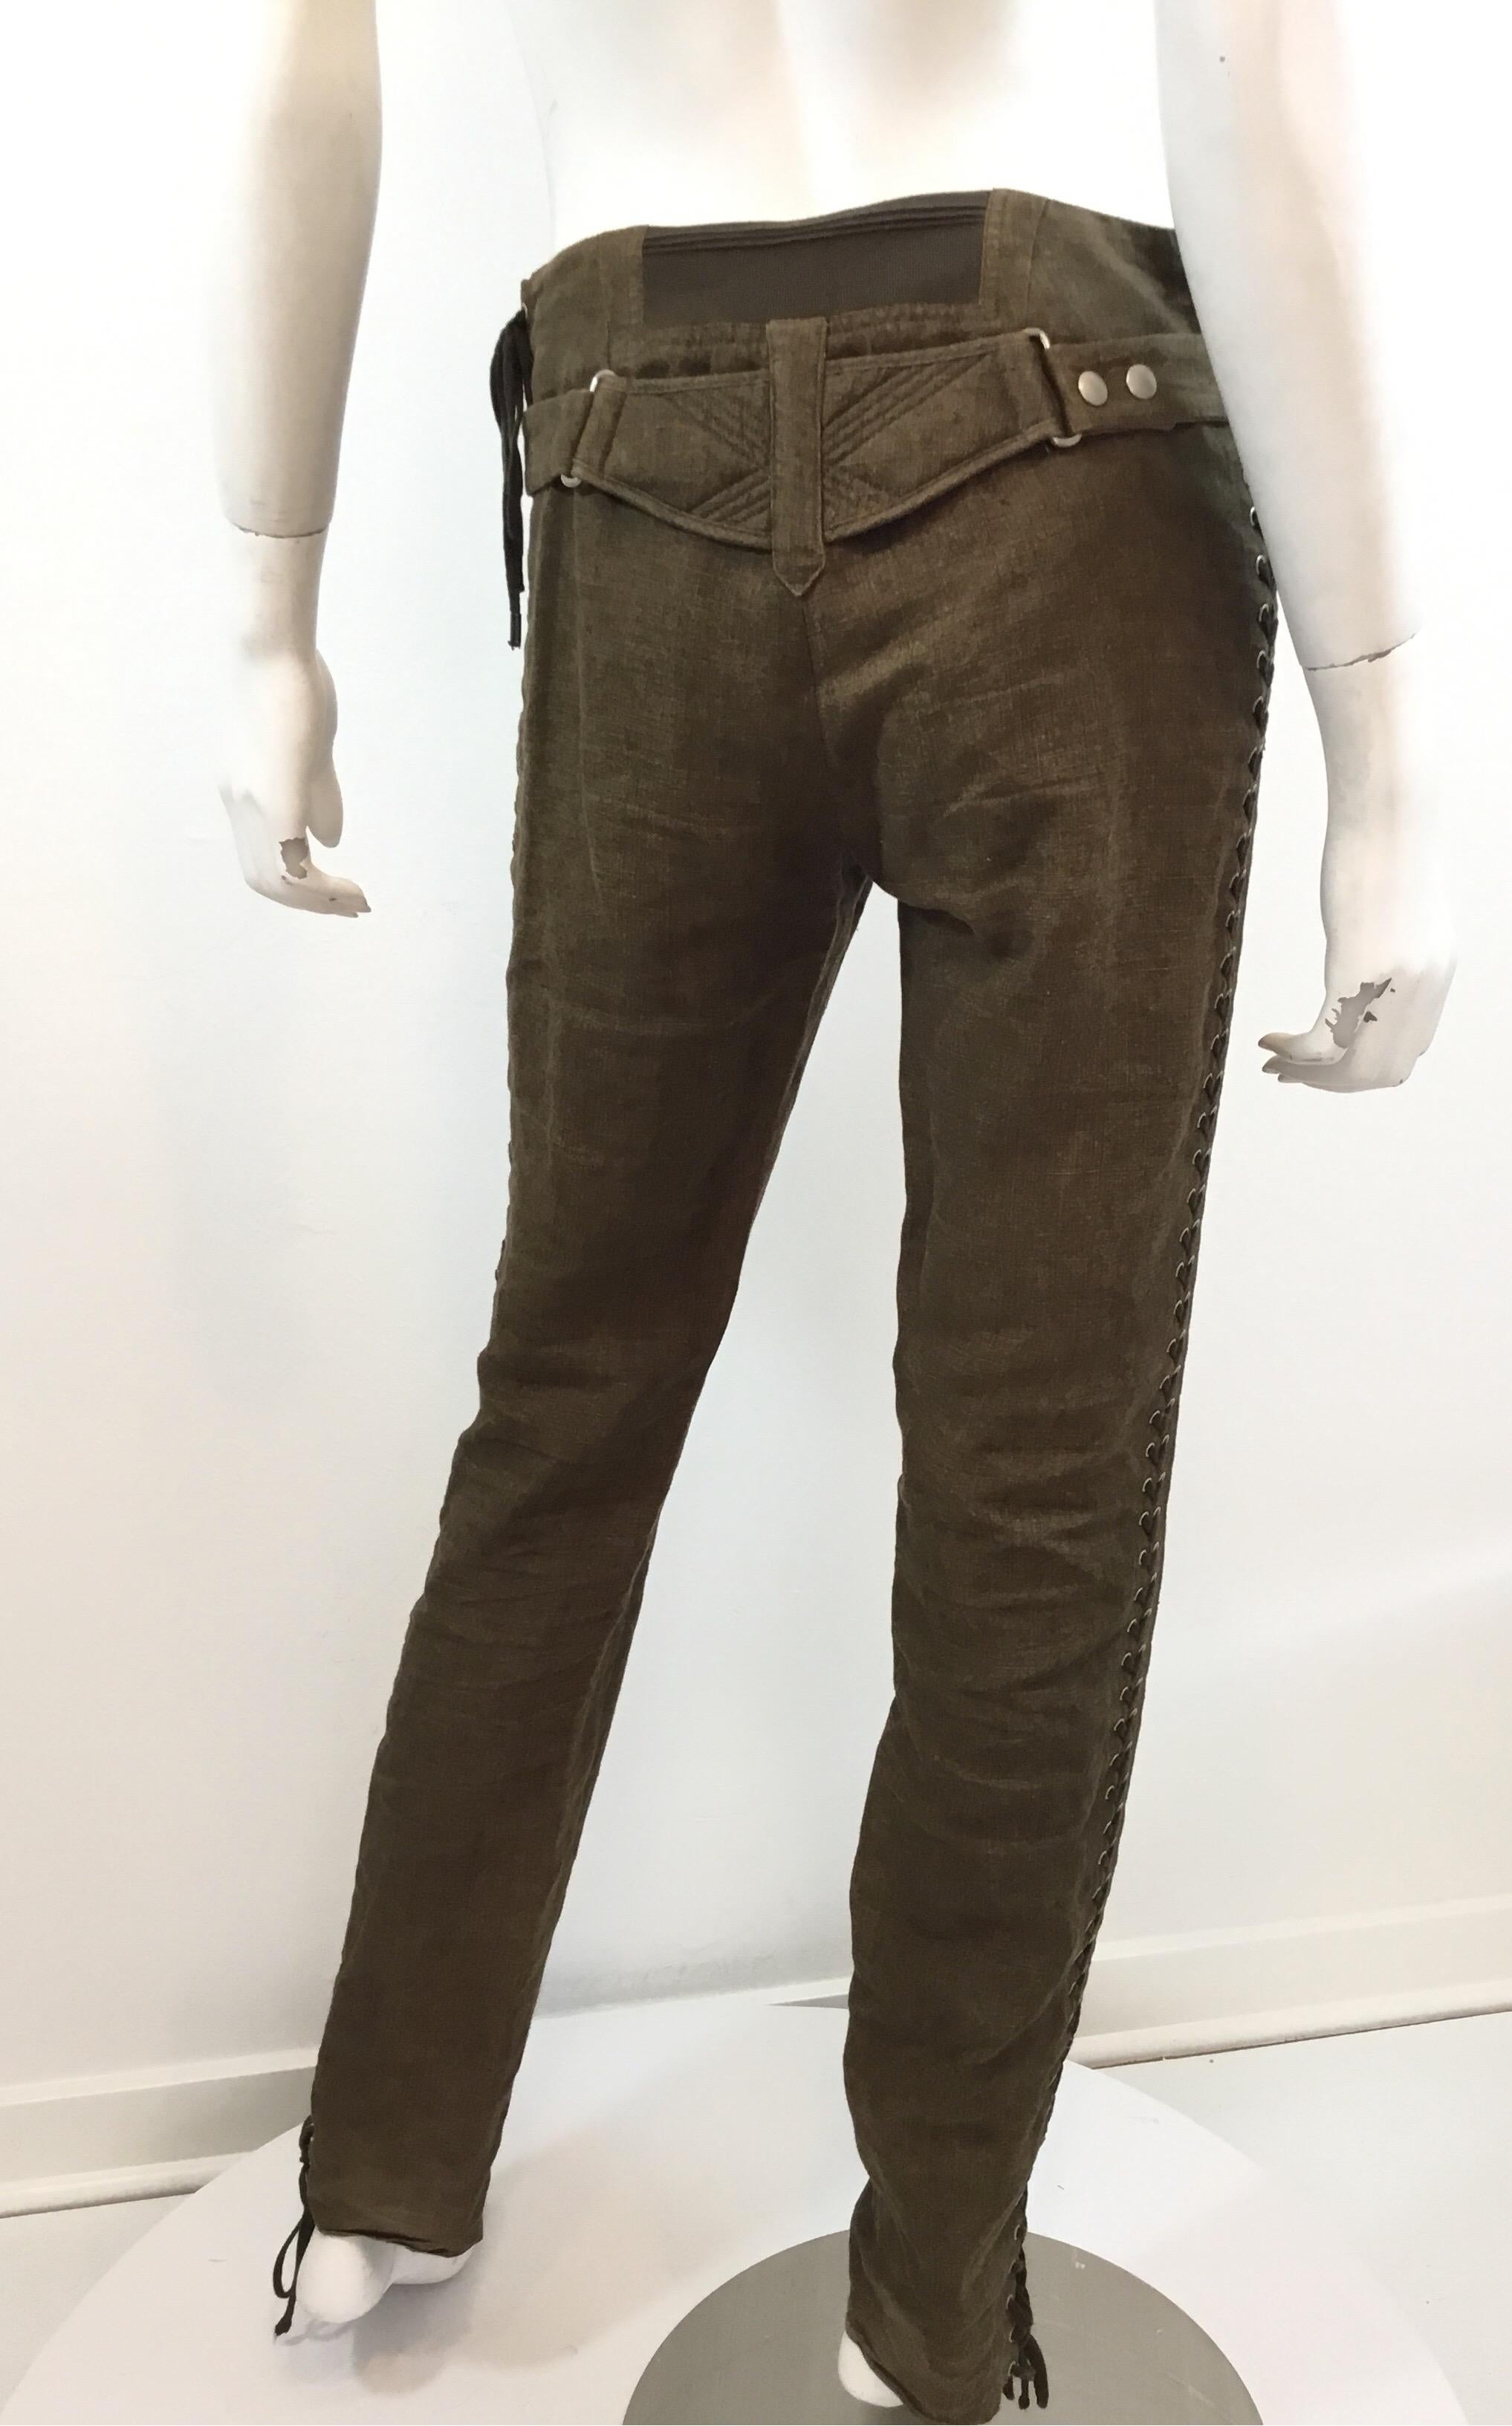 Jean Paul Gaultier Lace Up Linen Pants In Excellent Condition For Sale In Carmel, CA